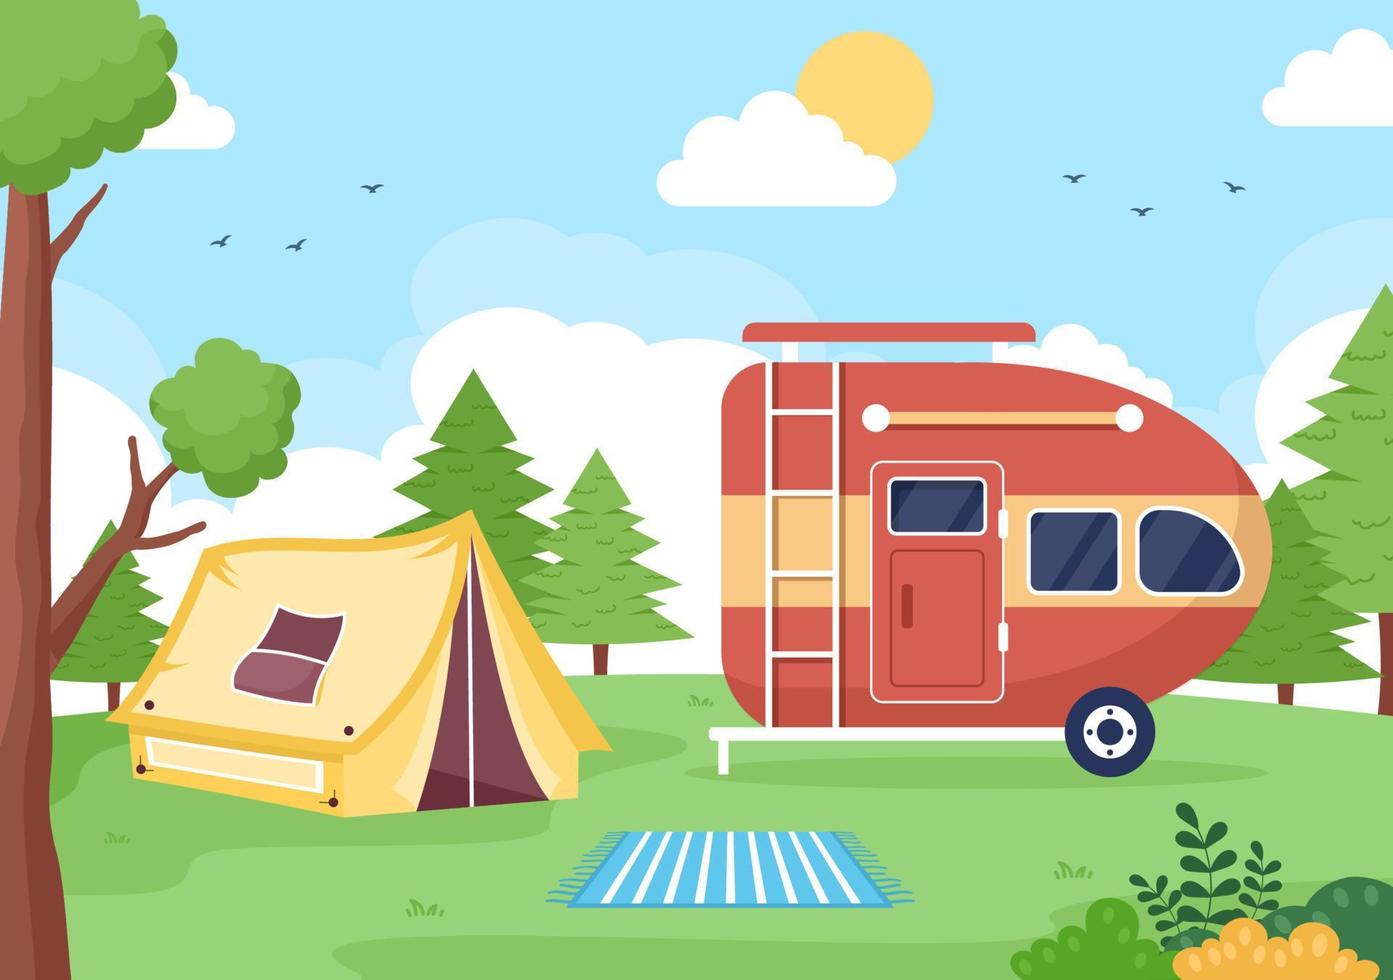 Camping Car Background Illustration with Tent, Campfire, Firewood, Camper Car and its Equipment for People on Adventure Tours or Holidays in the Forest or Mountains vector